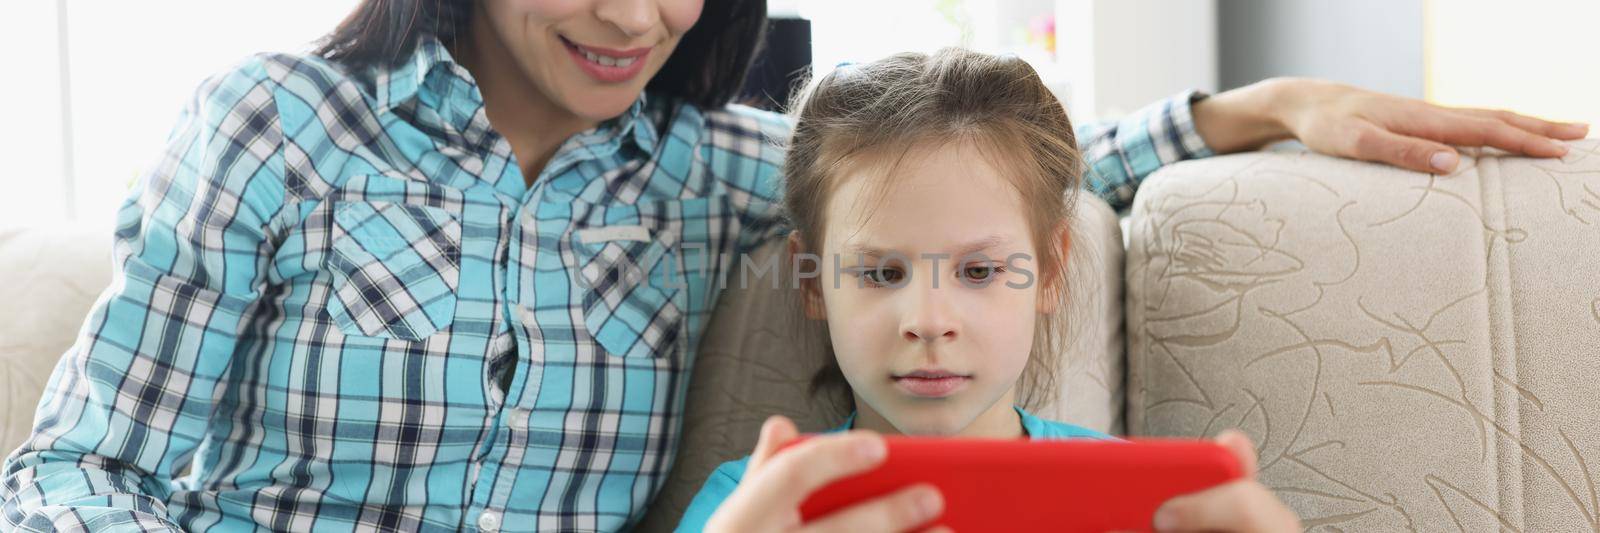 Portrait of daughter play online video games on smartphone and mum watch it. Childs addiction to modern devices. Family time, childhood, parenthood concept